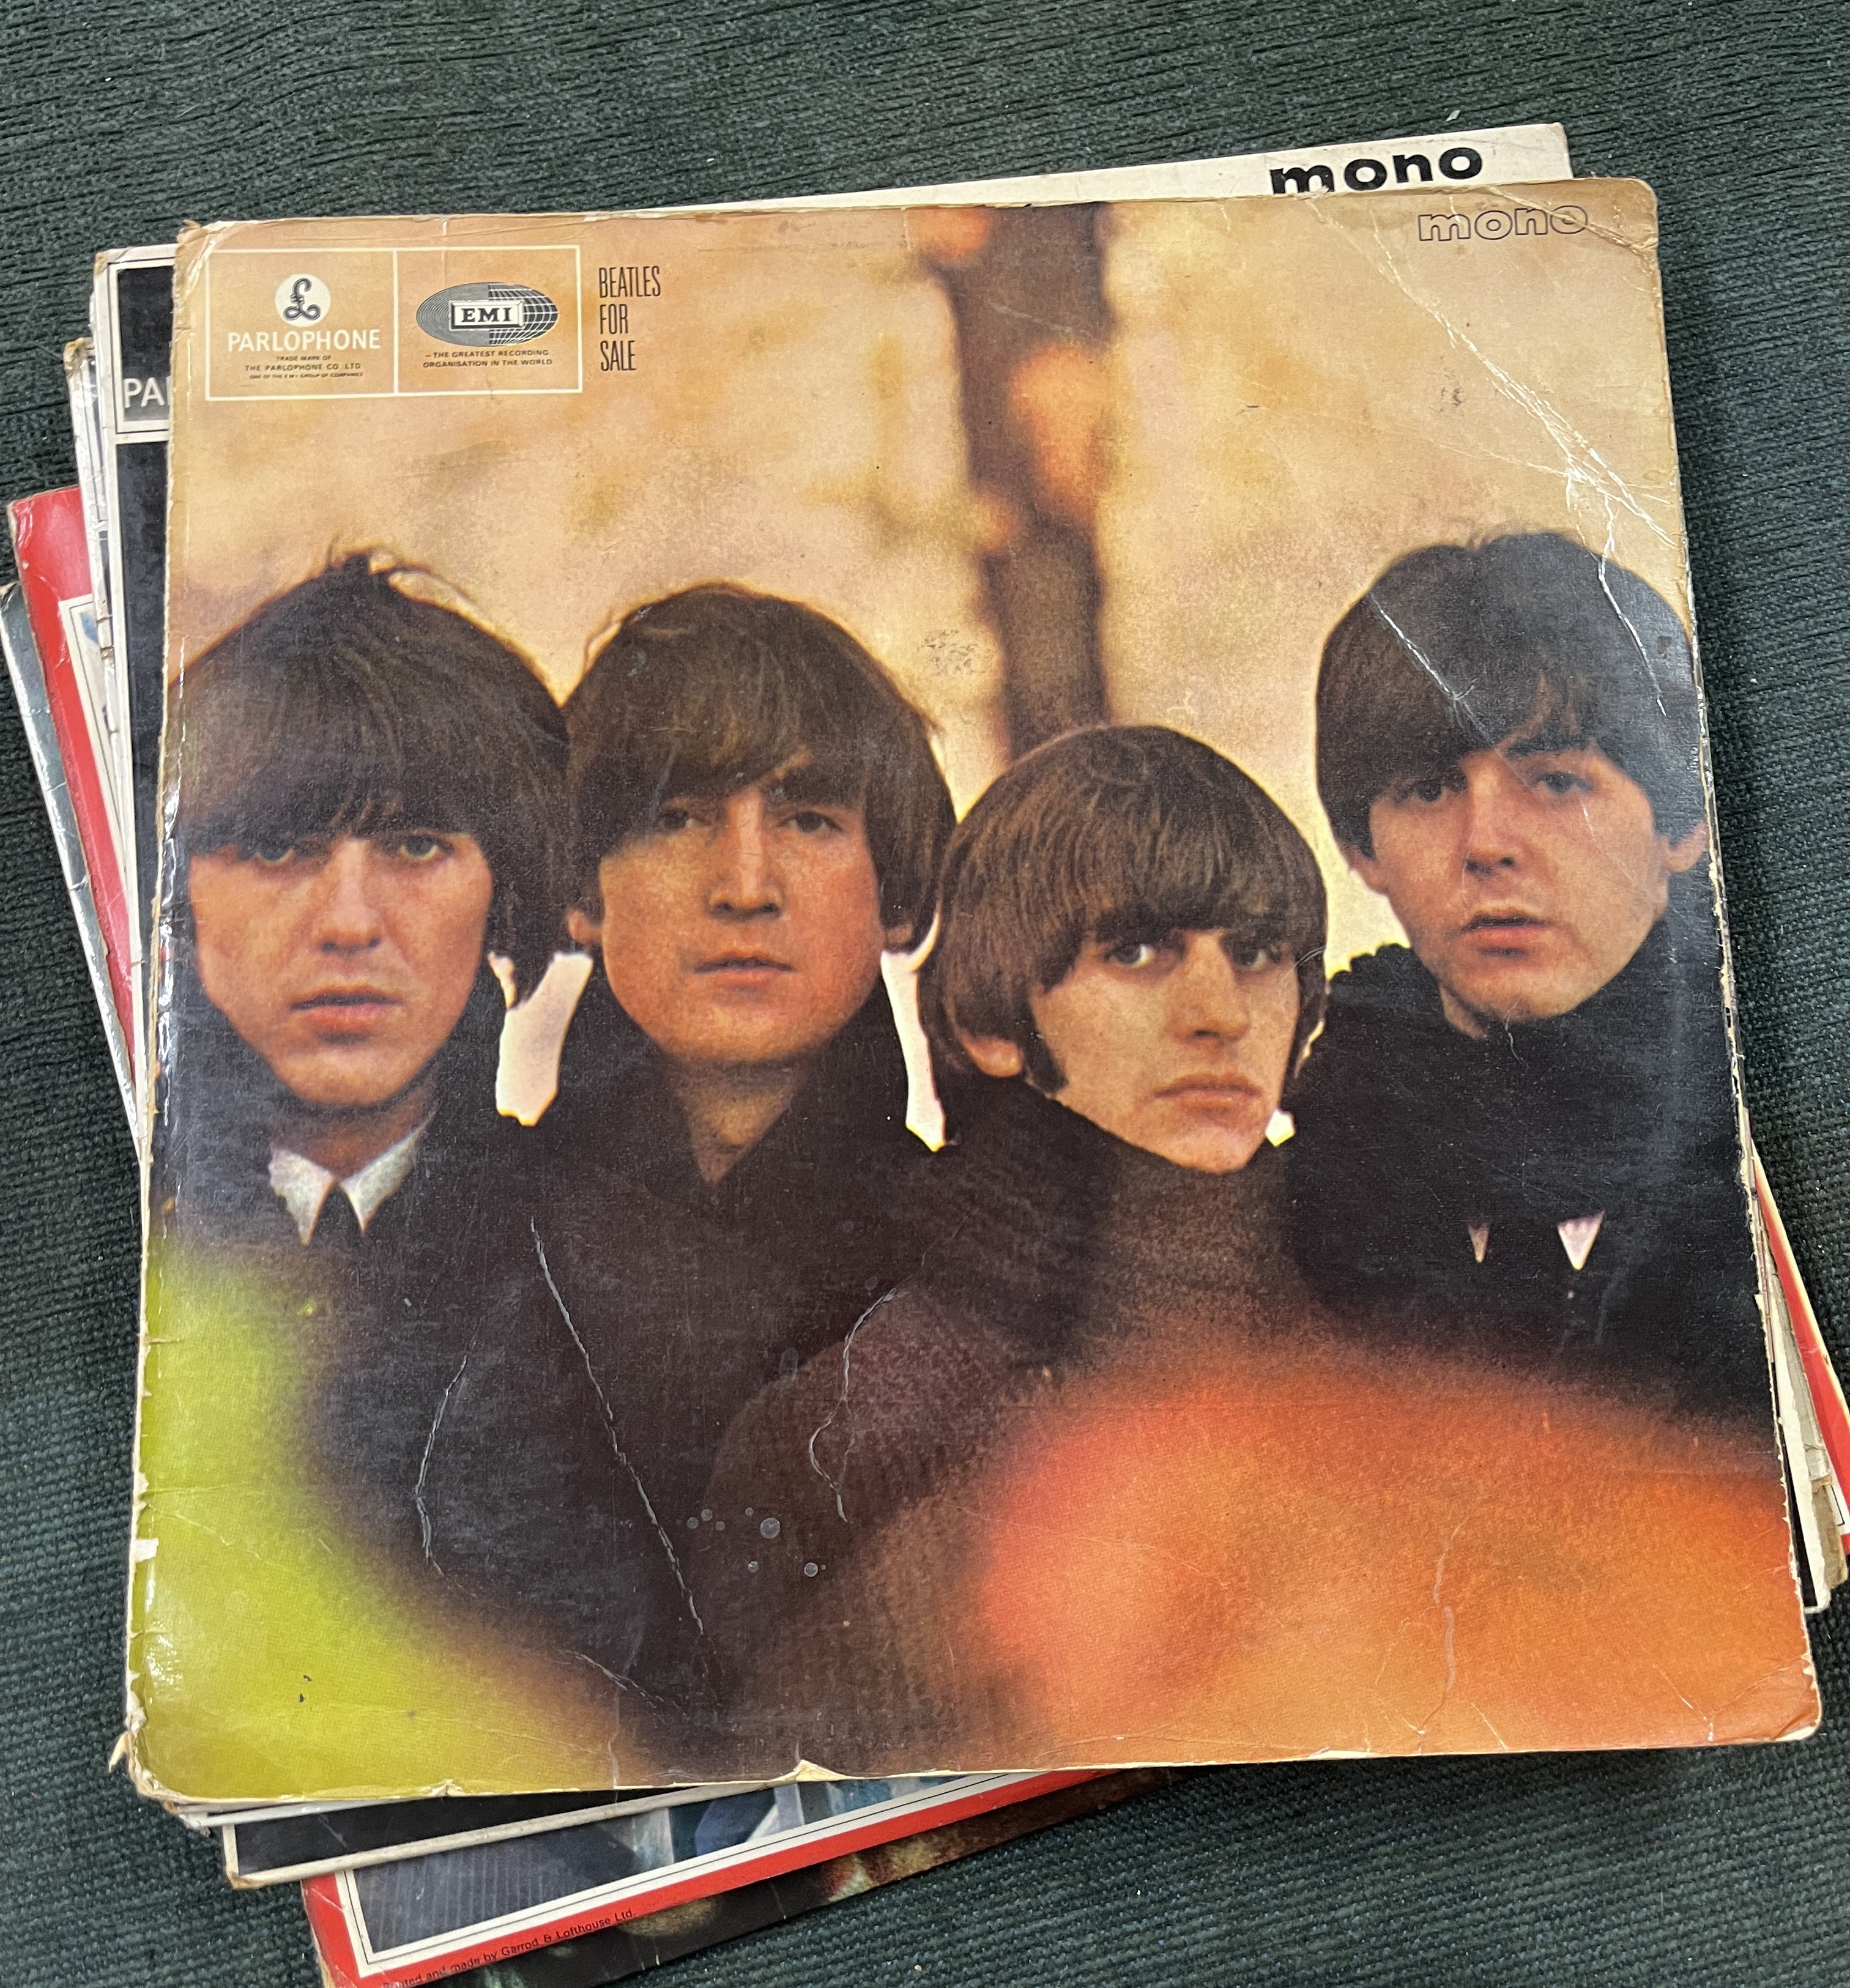 Beatle Lps - First pressing - Image 3 of 9